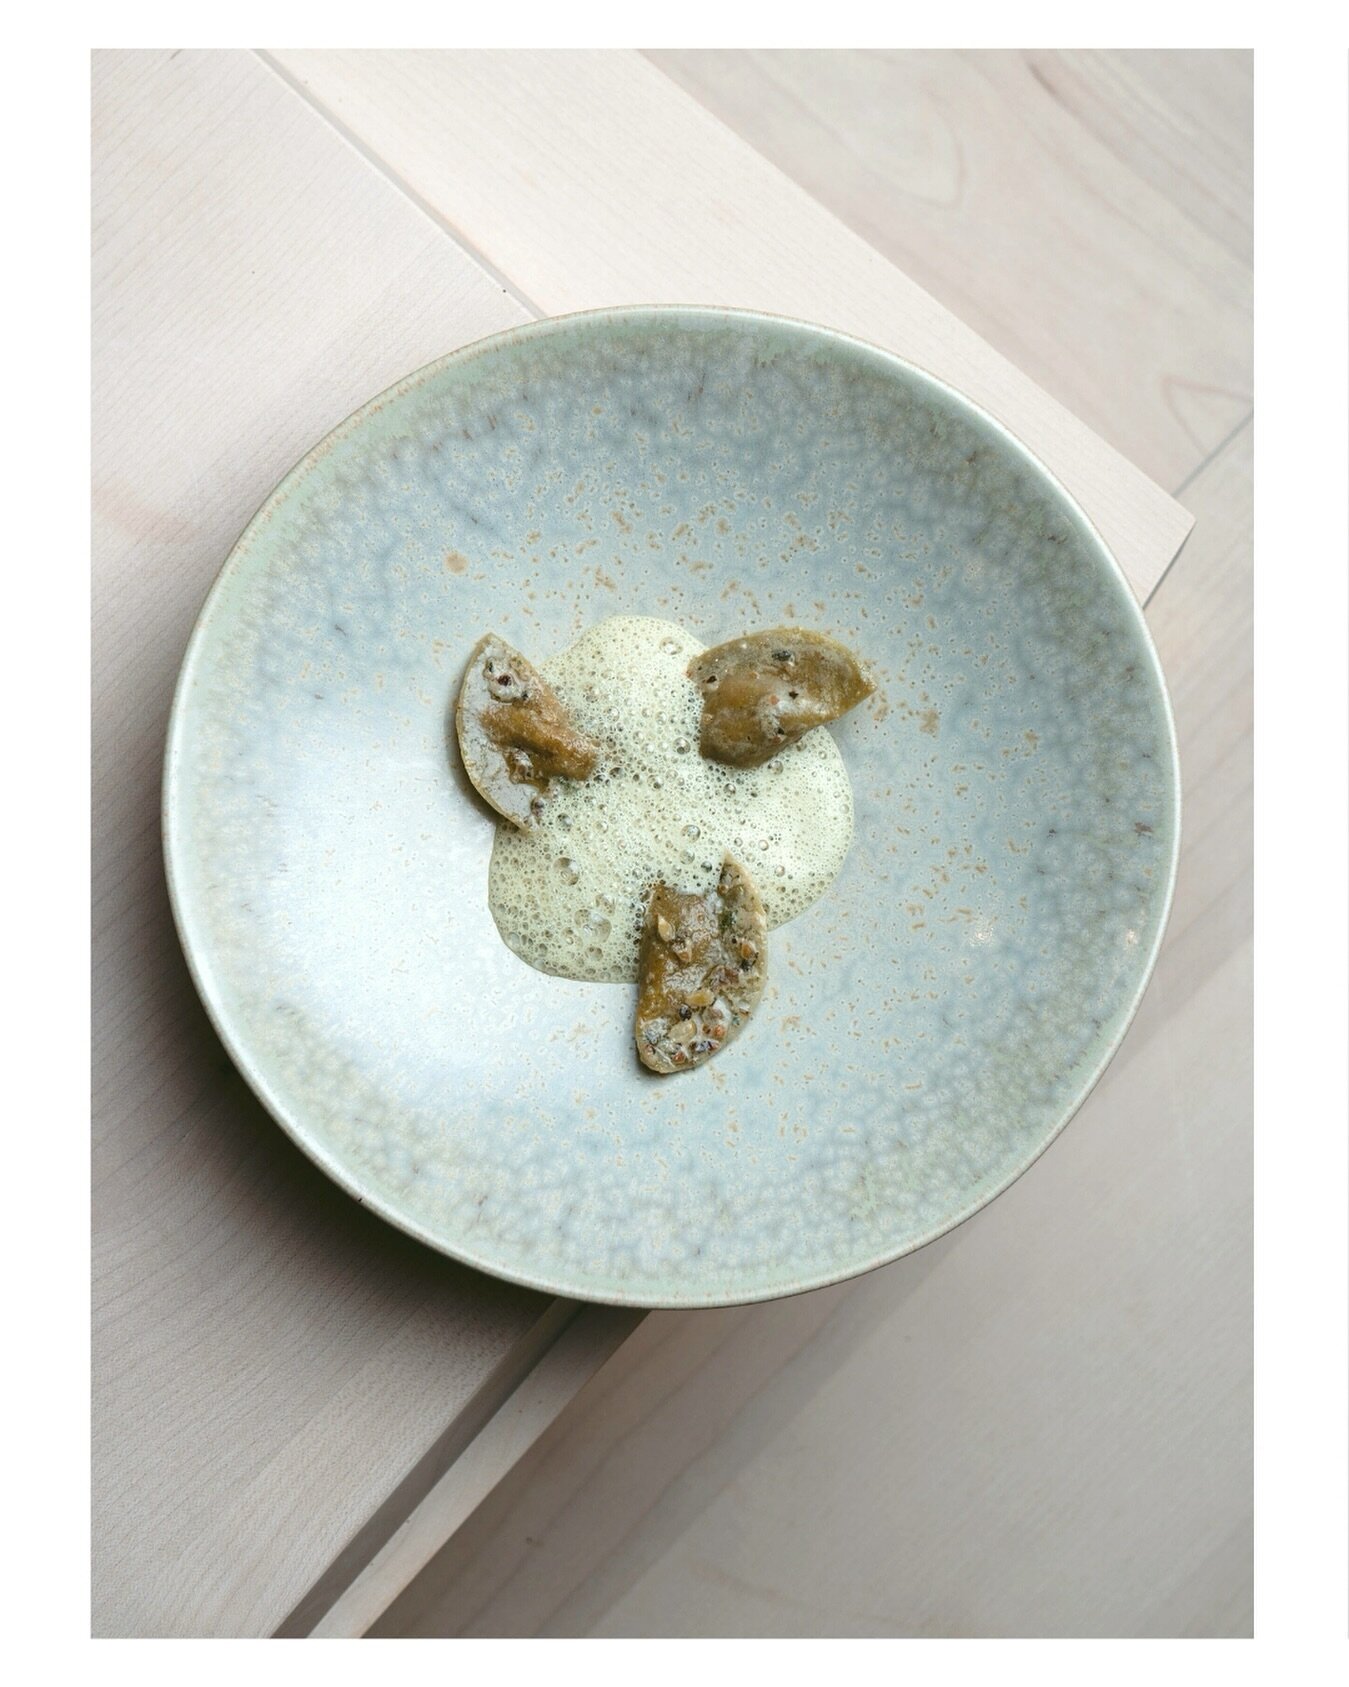 Veganuary - Our entirely pumpkin based dish.

Pumpkin - Sage

Reservations- link in highlights 
 
#MICHELINguideswiss #MICHELINstar
#oneMICHELINstar #gaultmillau
#OZ #vegetarian #andreascaminada
#caminadagroup
#furstenauthesmallestcityintheworld
@and